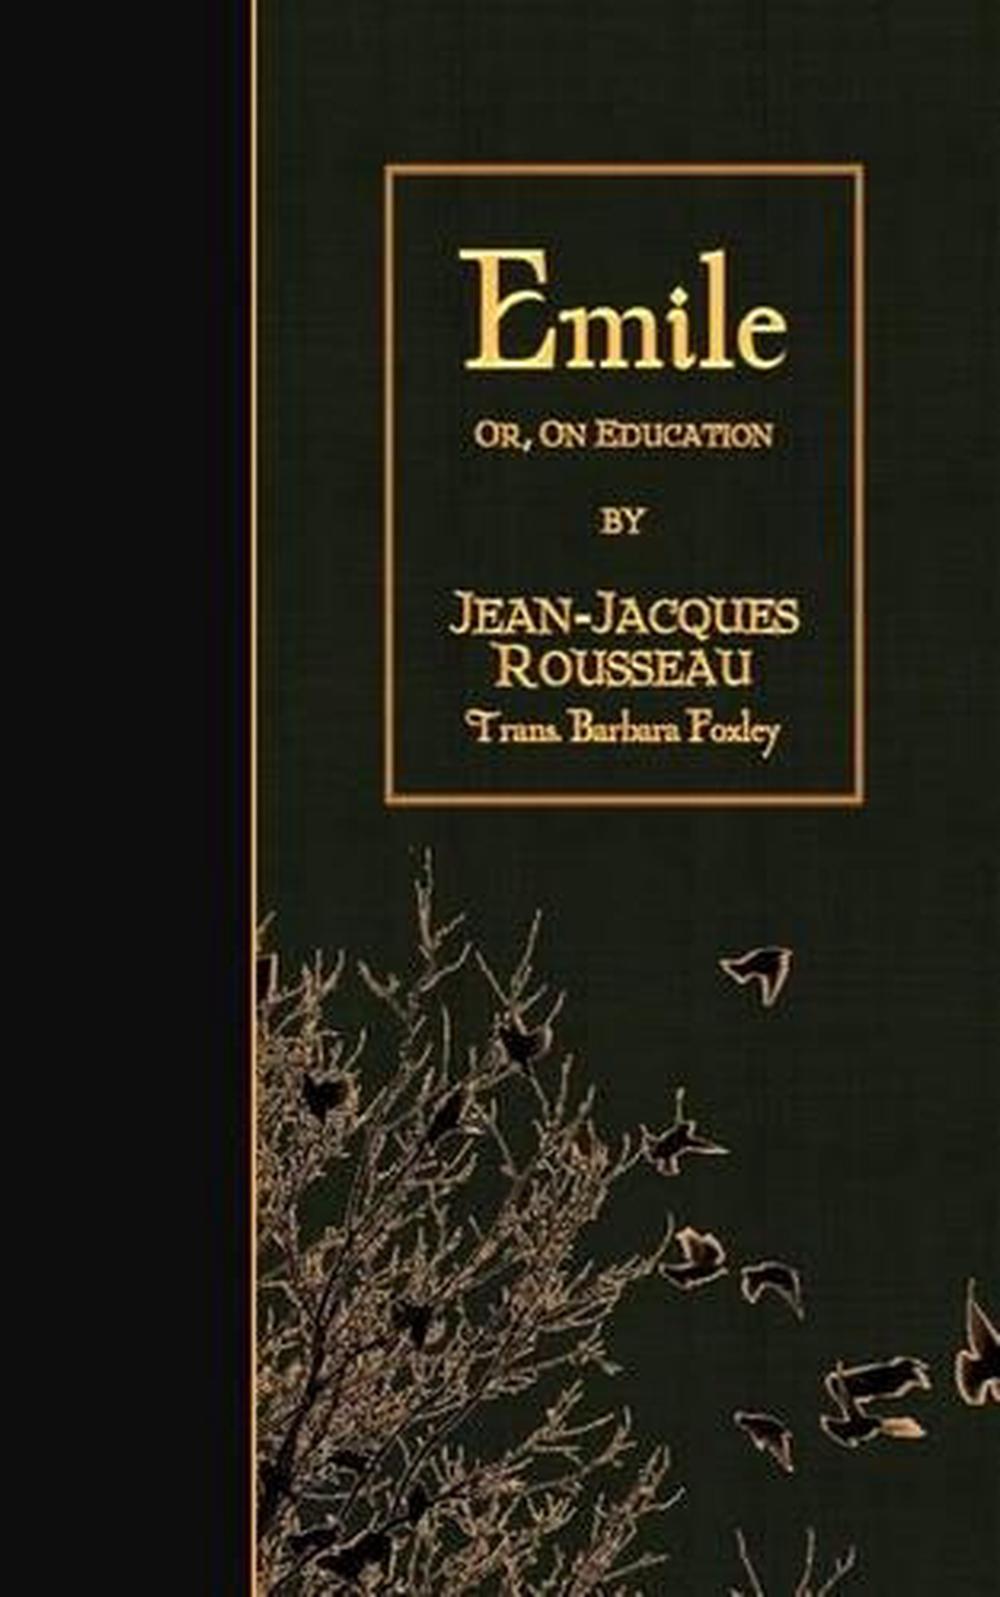 emile or on education by jean jacques rousseau